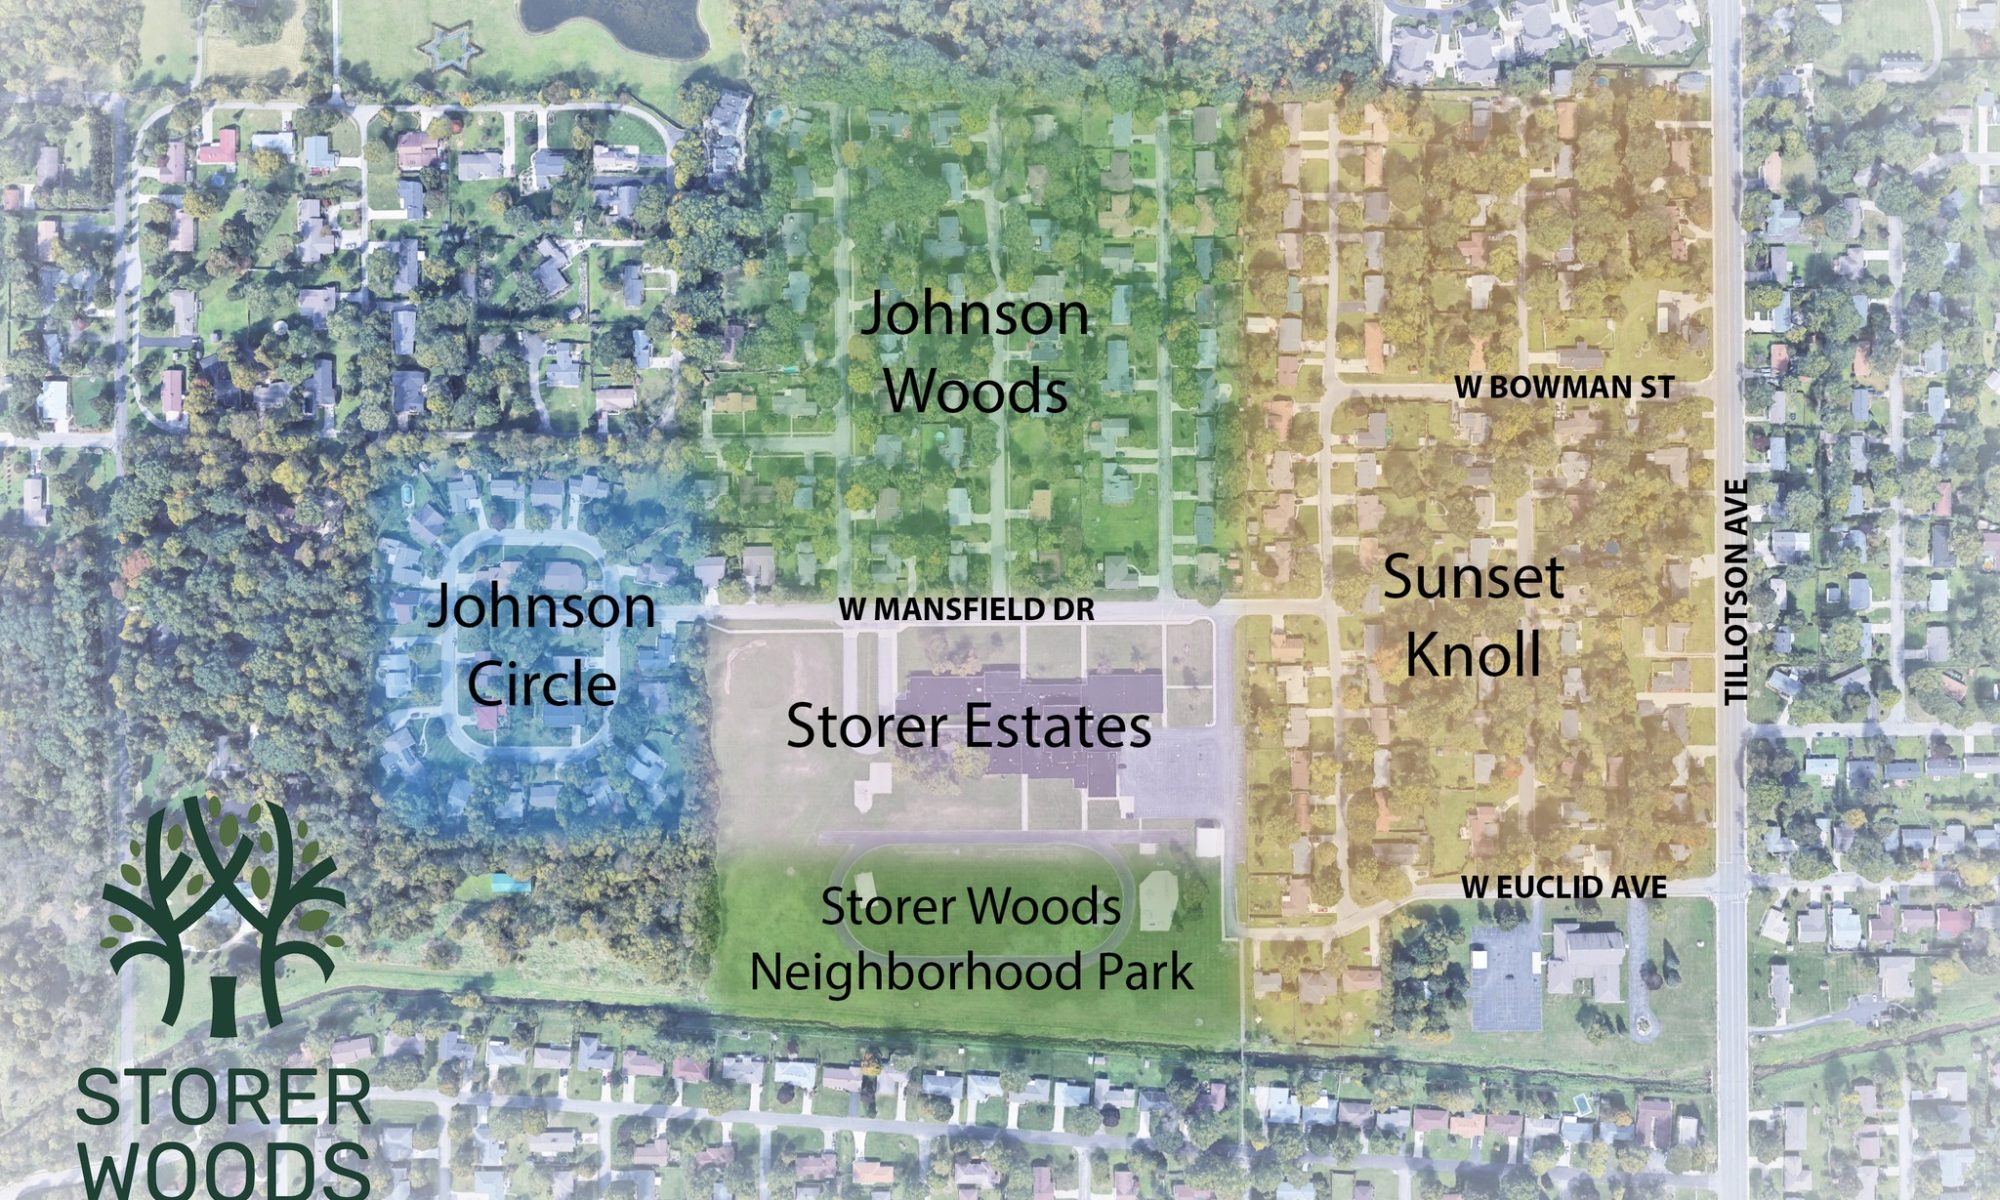 Map of the Neighborhood area showing the former neighborhoods that have combined to make up Storer Woods